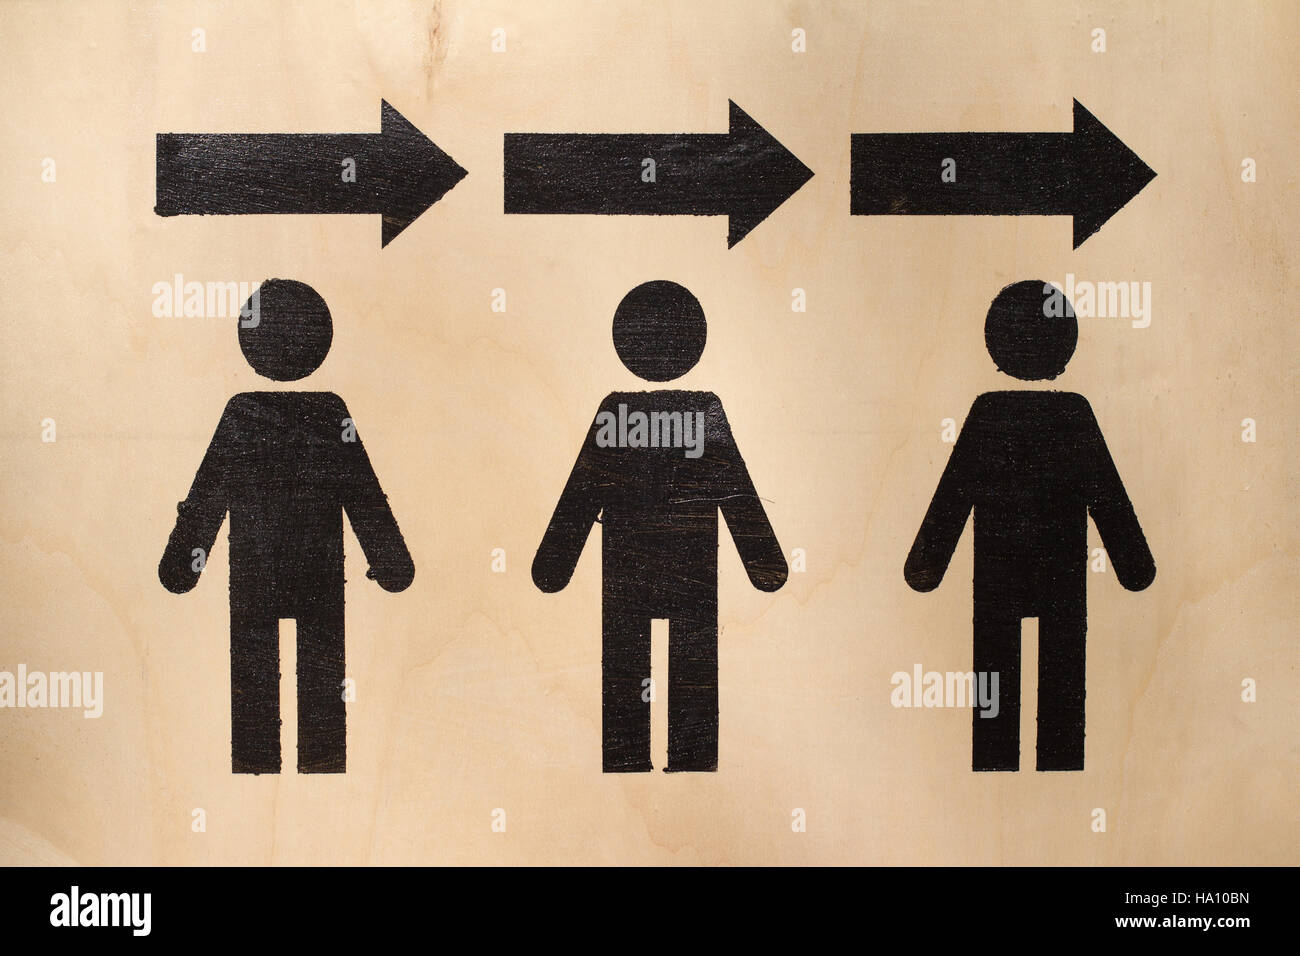 exit symbol with three human black icons with arrows above them on wood texture Stock Photo